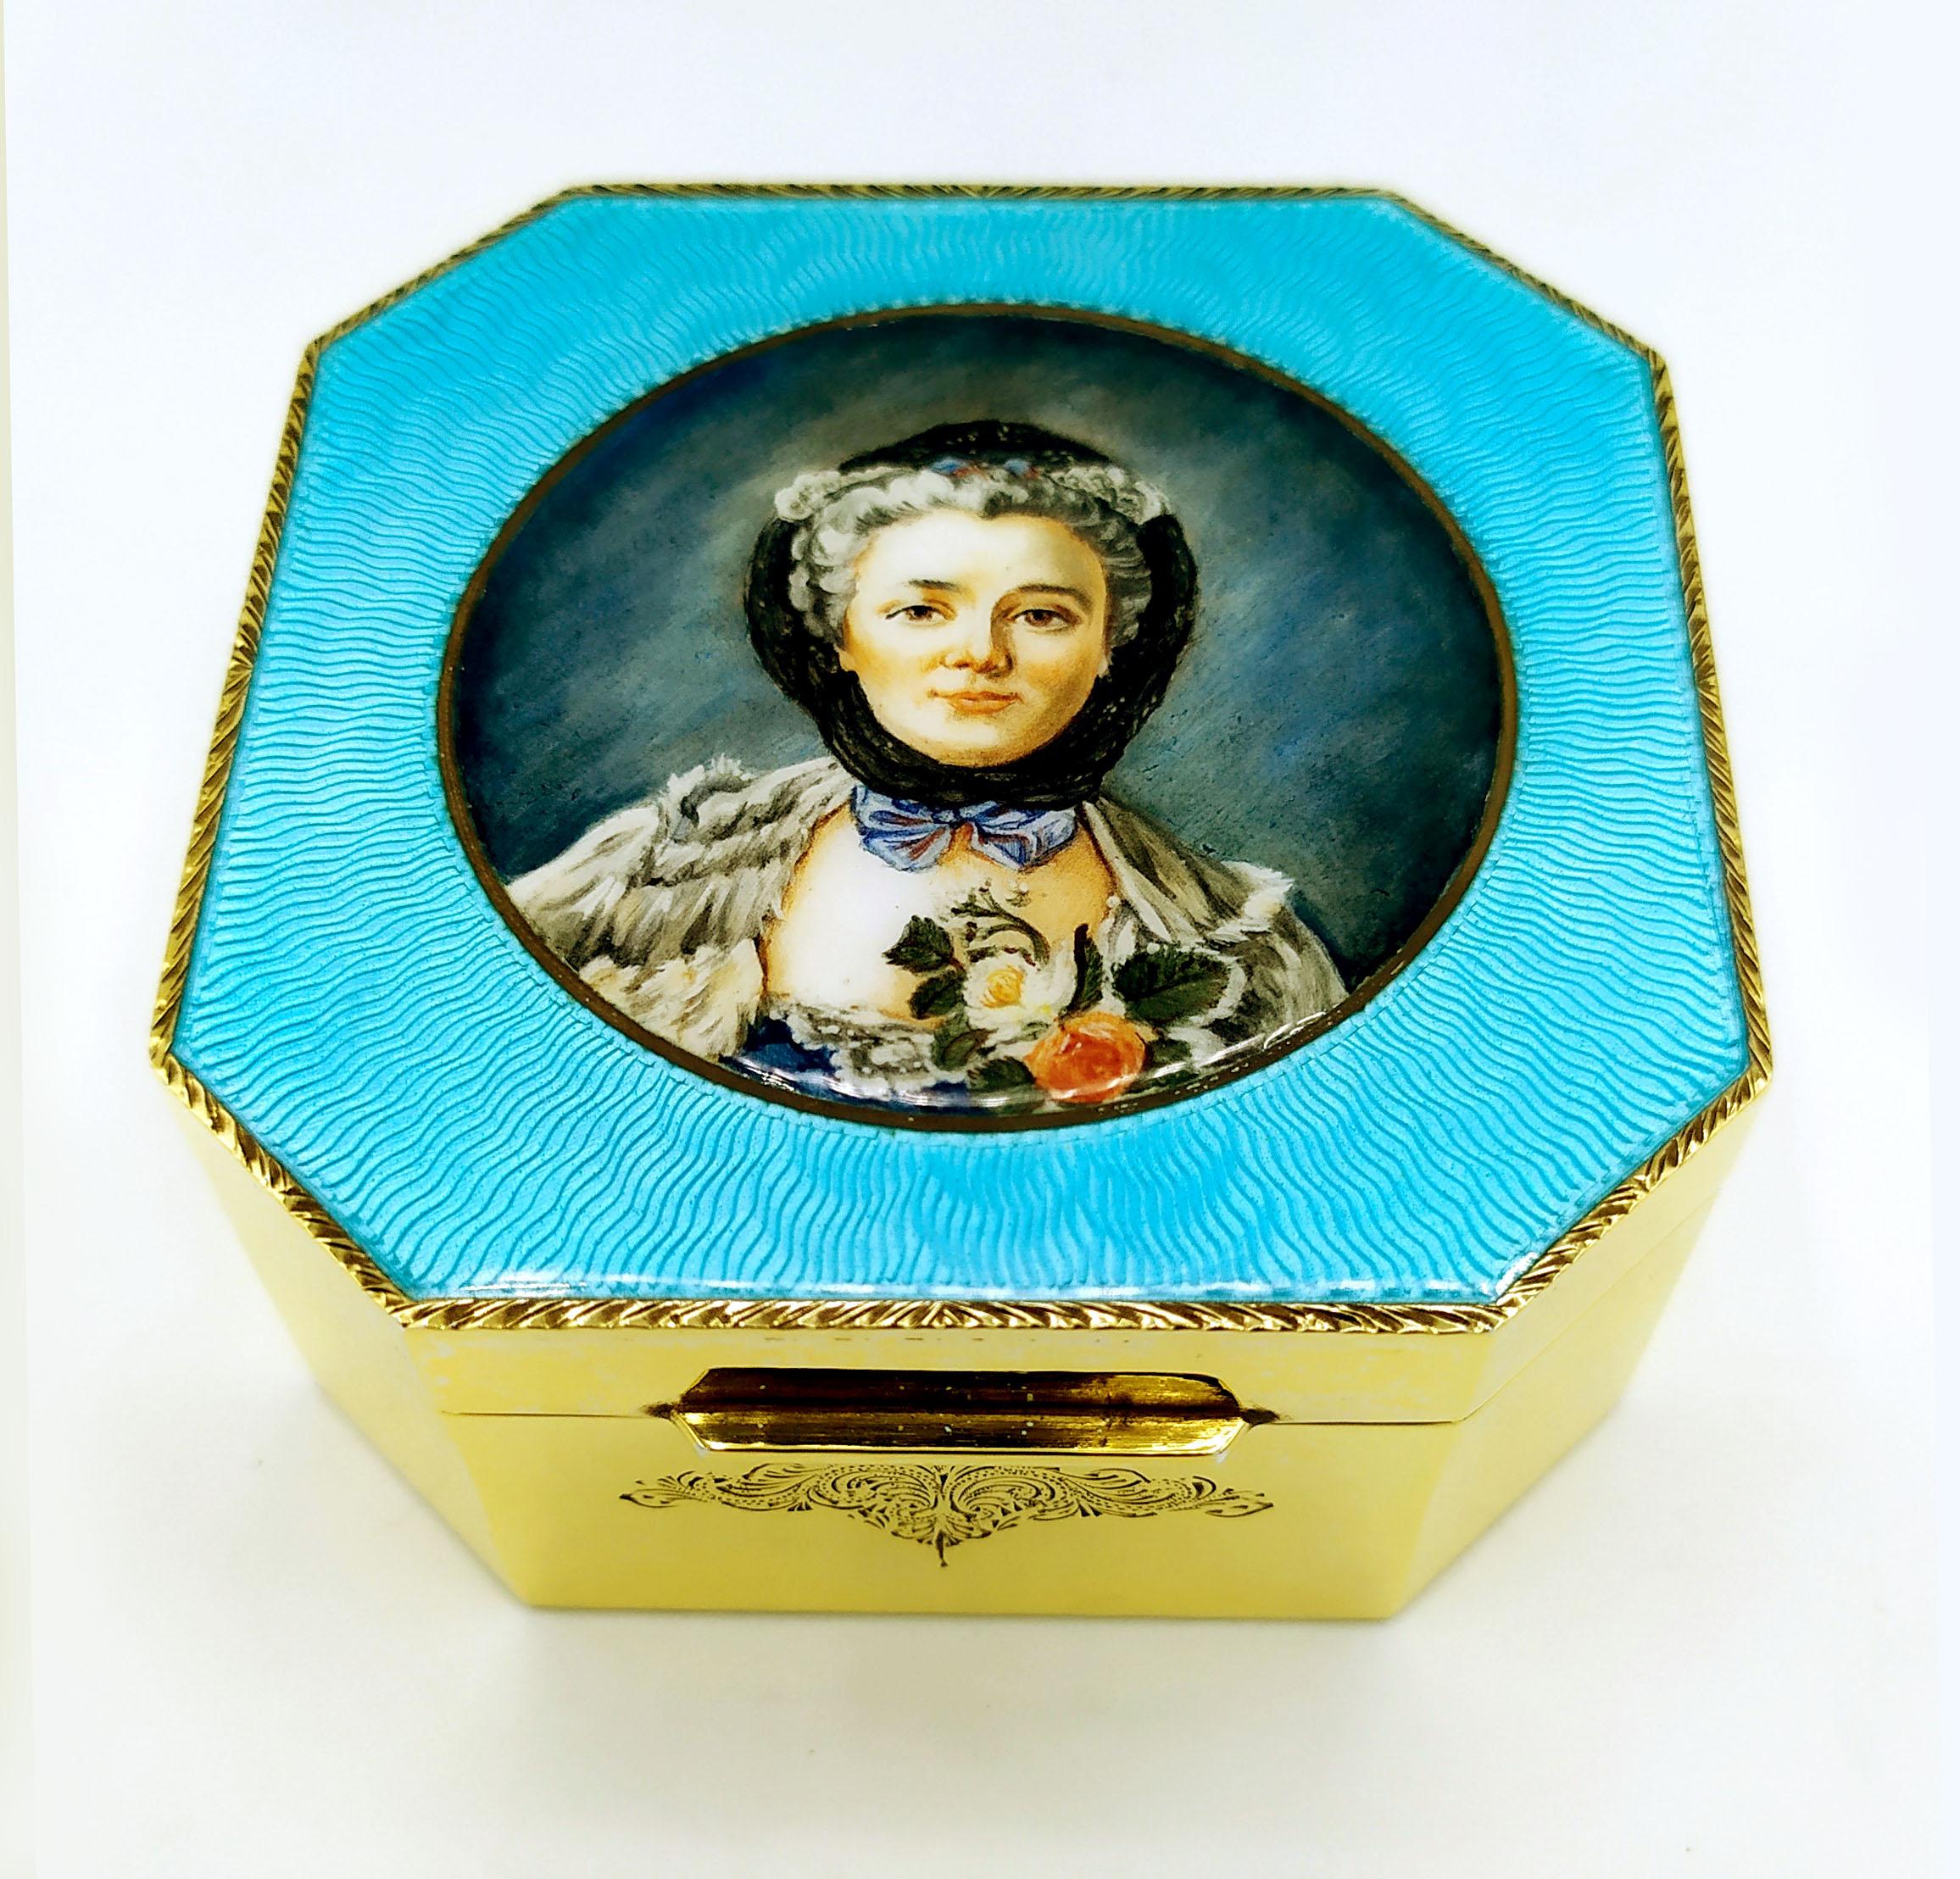 Octagonal table box in 925/1000 sterling silver gold plated with translucent fired enamel on guillochè and beautiful hand-painted enamelled miniature by the painter Beatrice Mellana reproducing the portrait of Madame Drouais painted by her husband